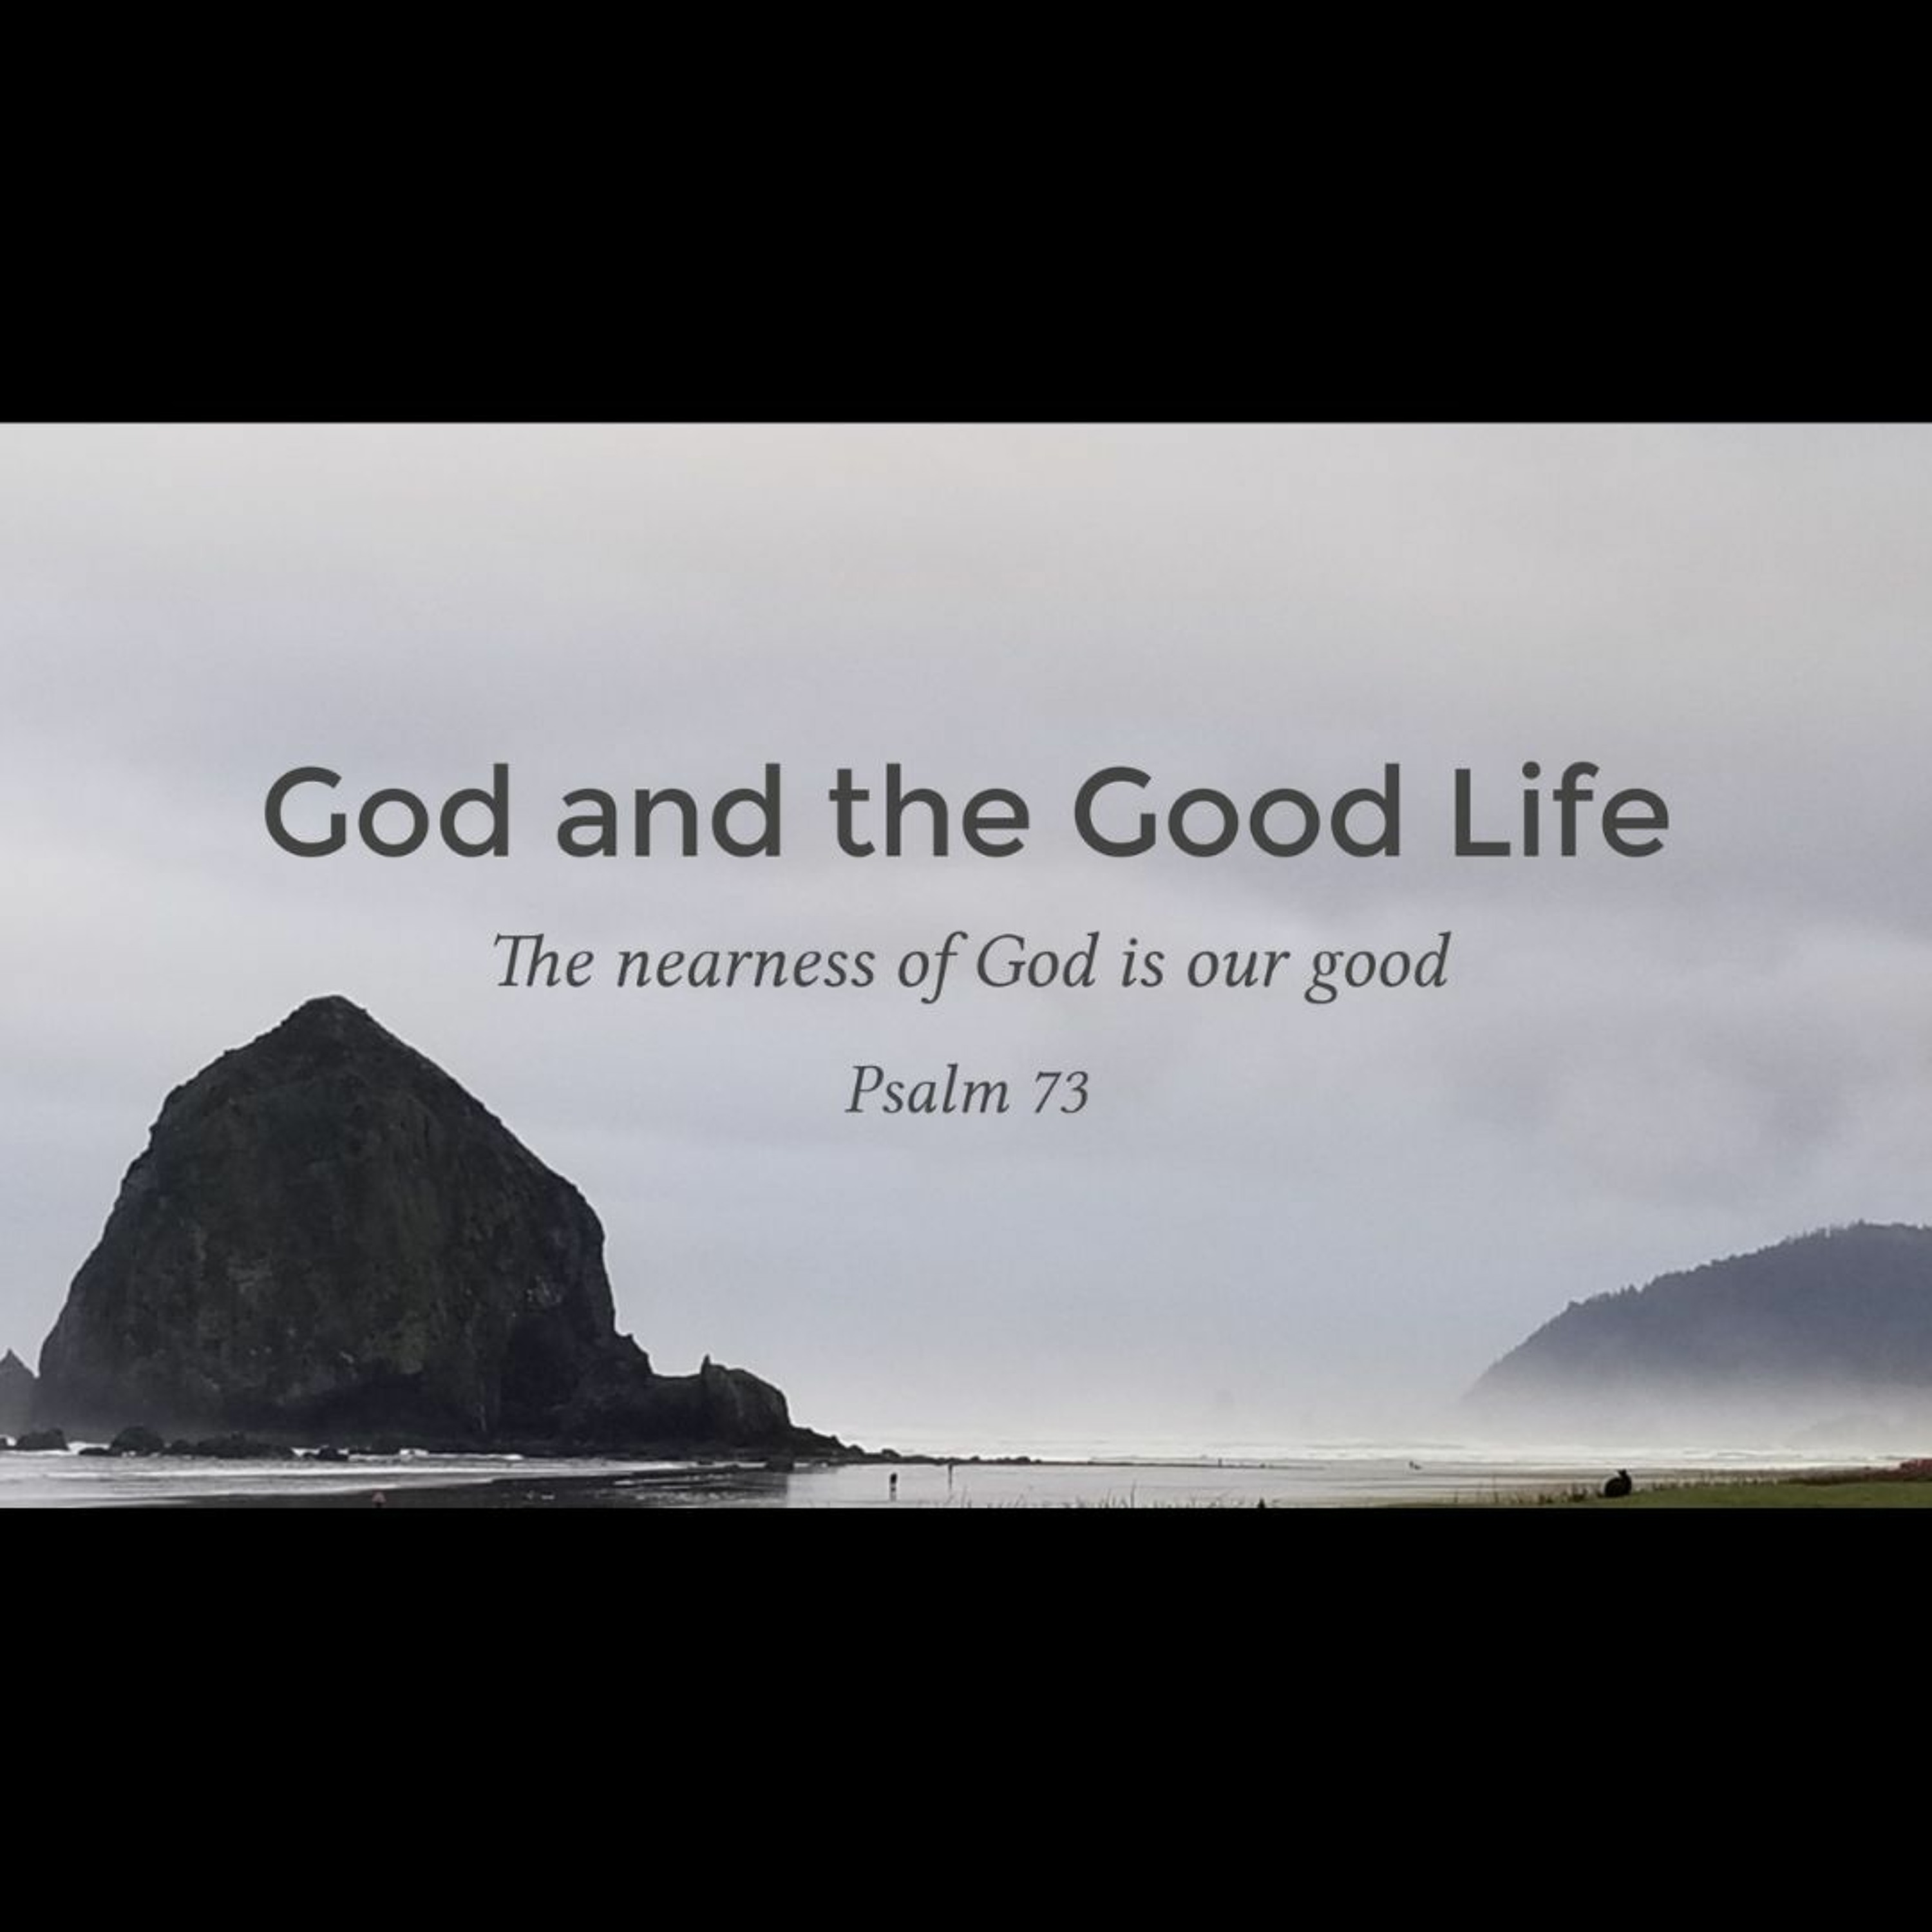 God and the Good Life (Psalm 73)